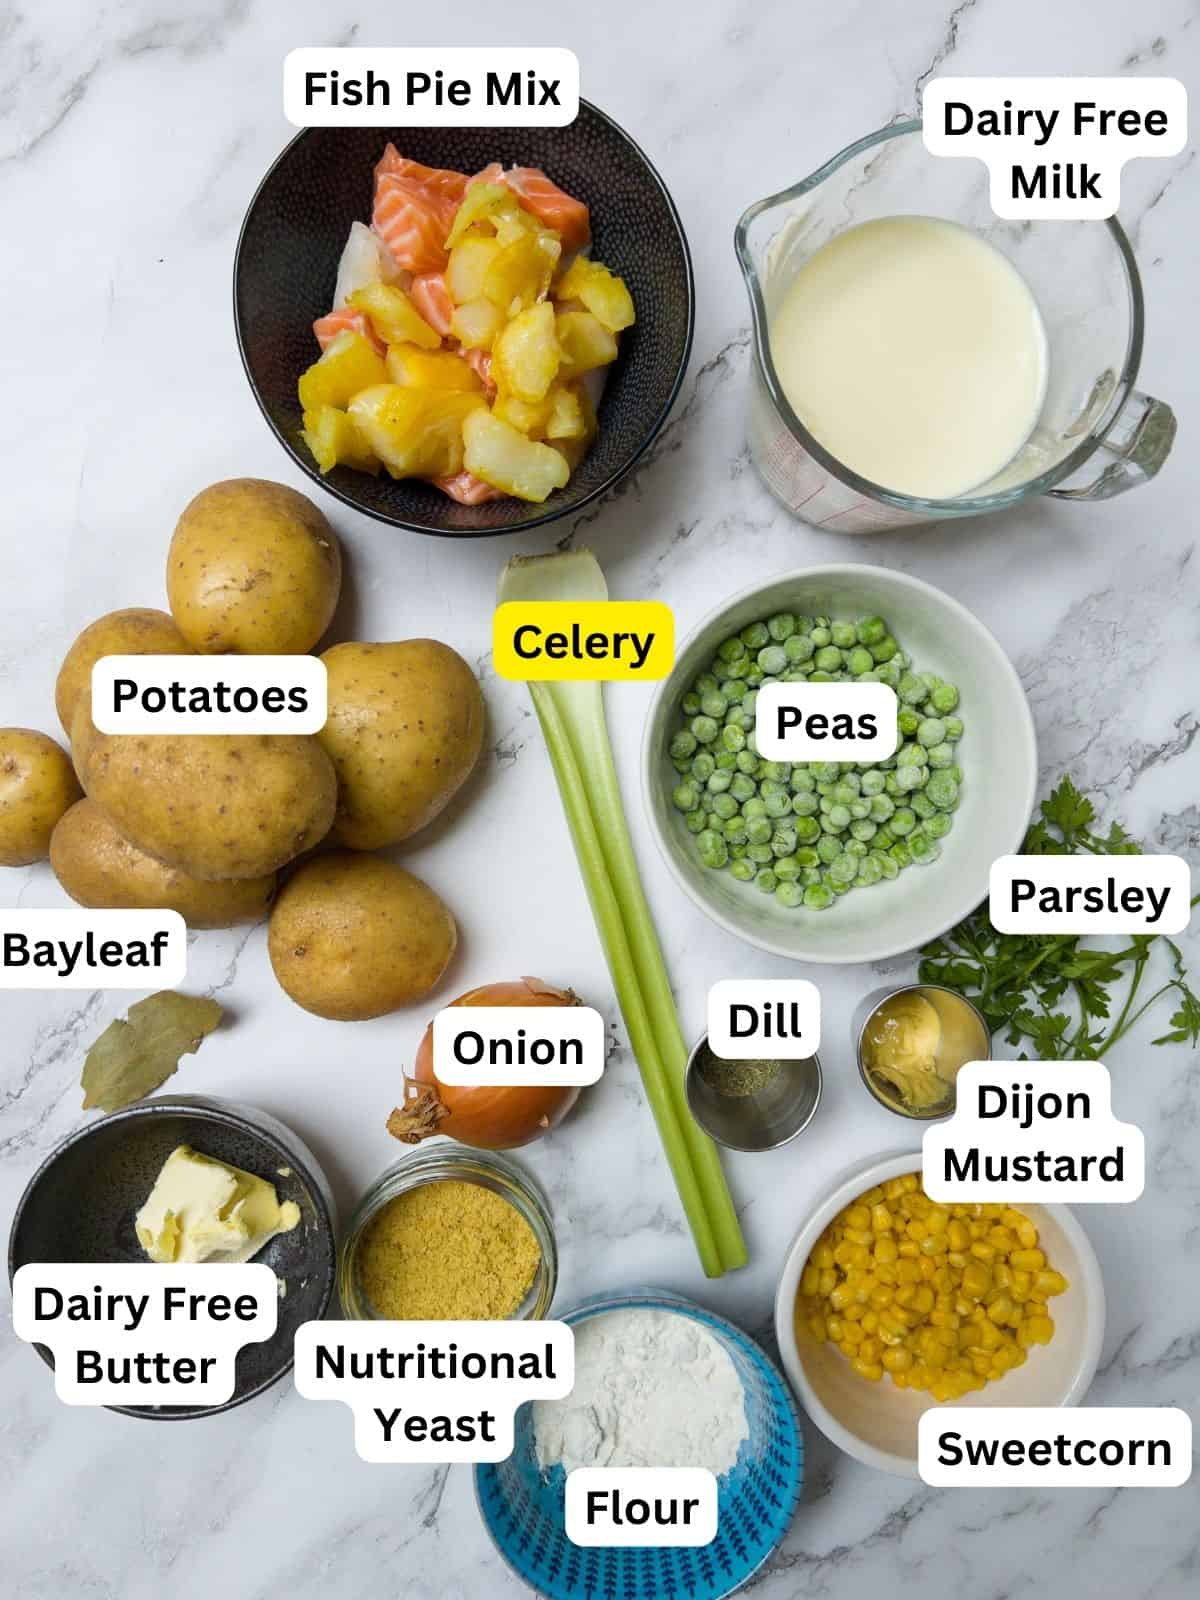 Ingredients laid out for dairy free fish pie.